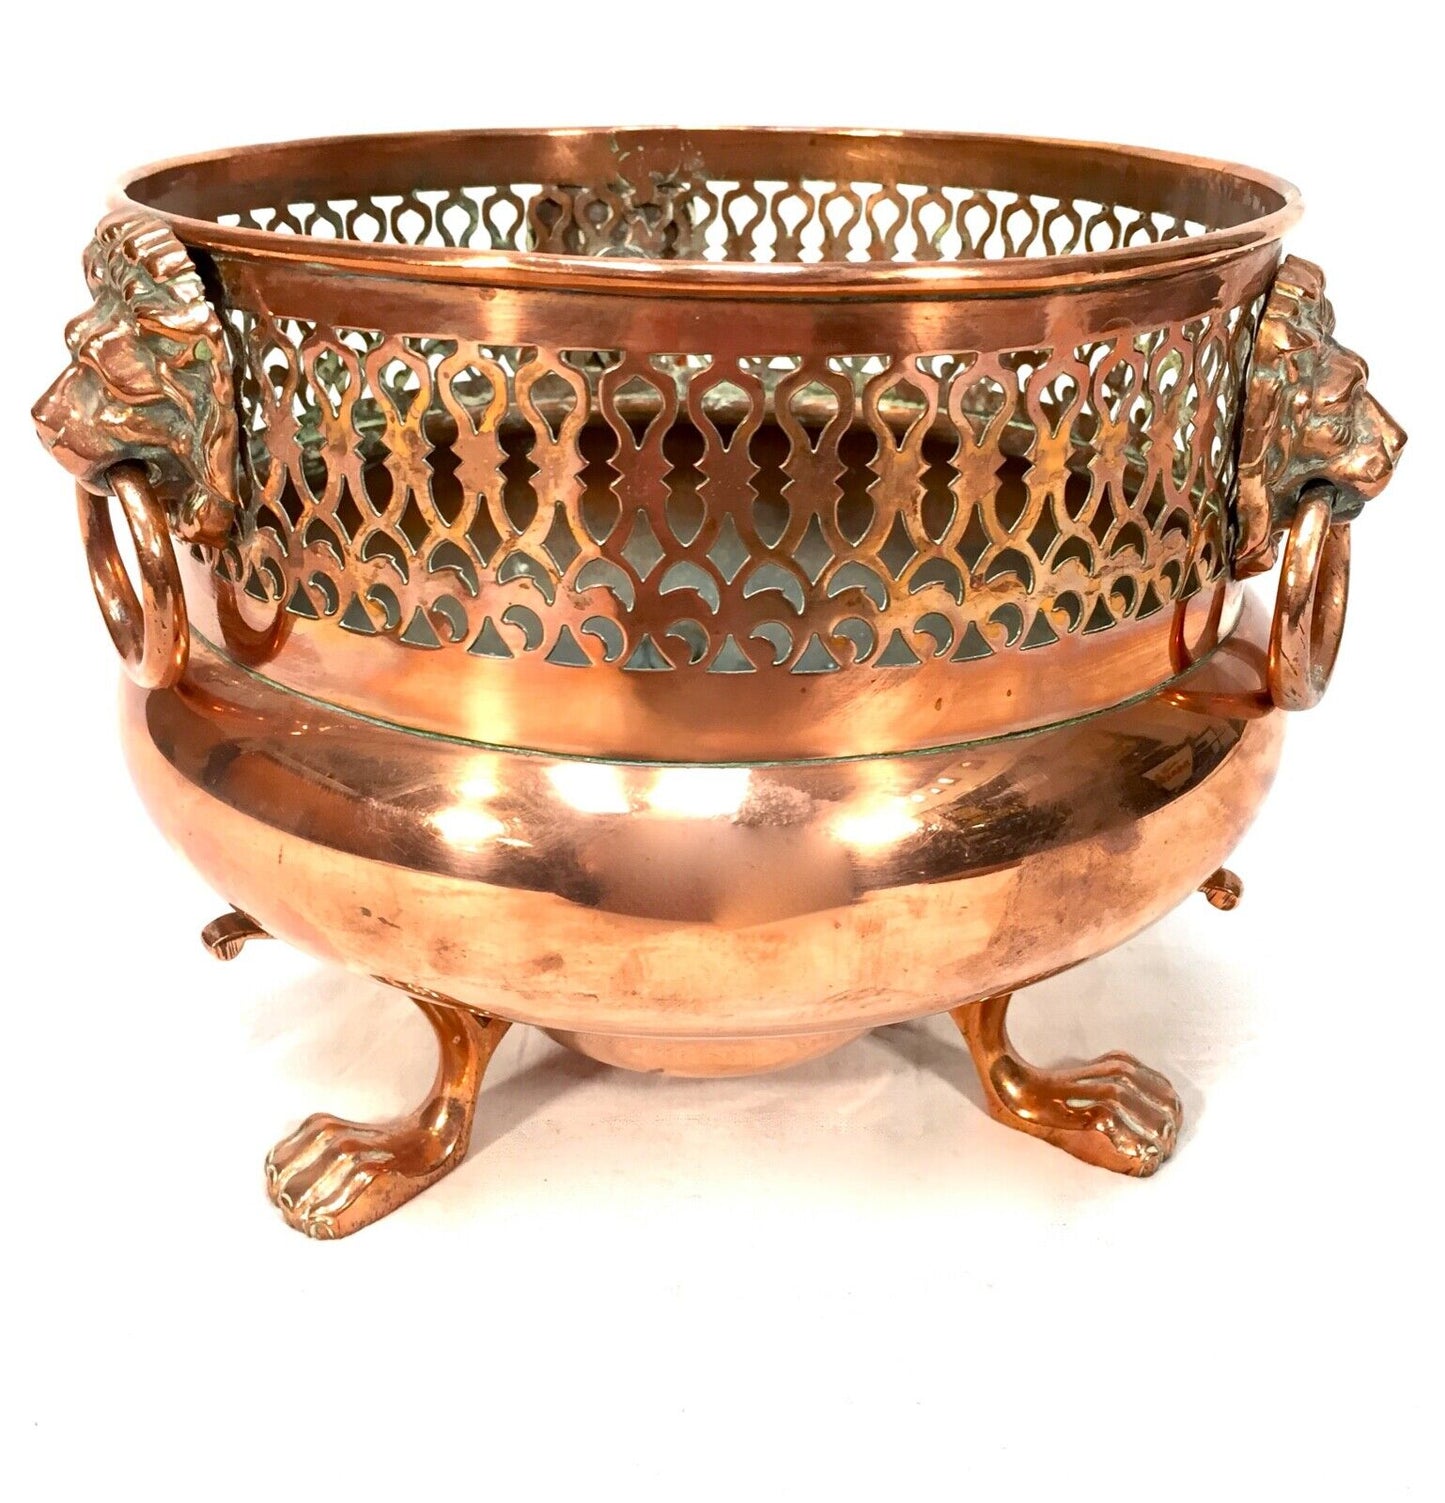 Antique Arts And Crafts Copper Planter by William Soutter & Sons / c.1890